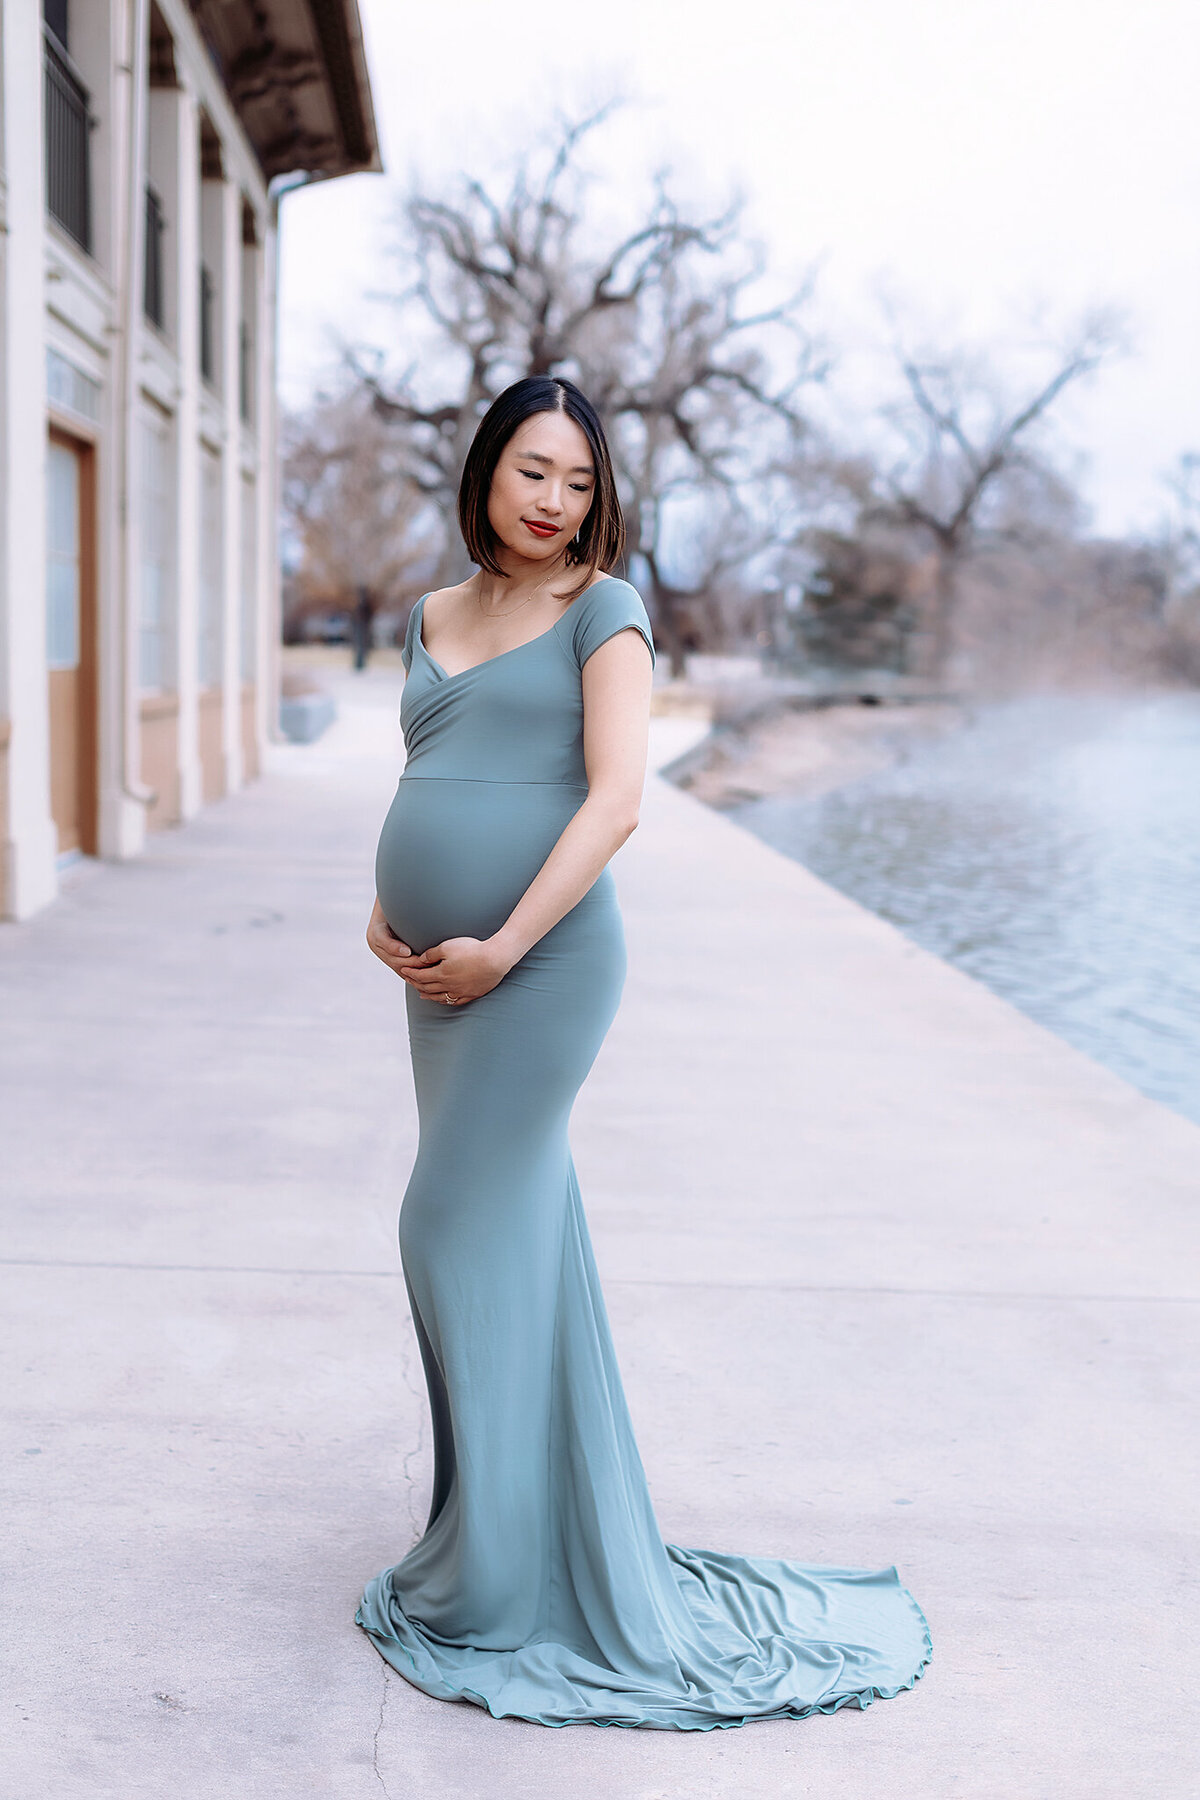 pregnant mama in washington park in denver co for her maternity photos